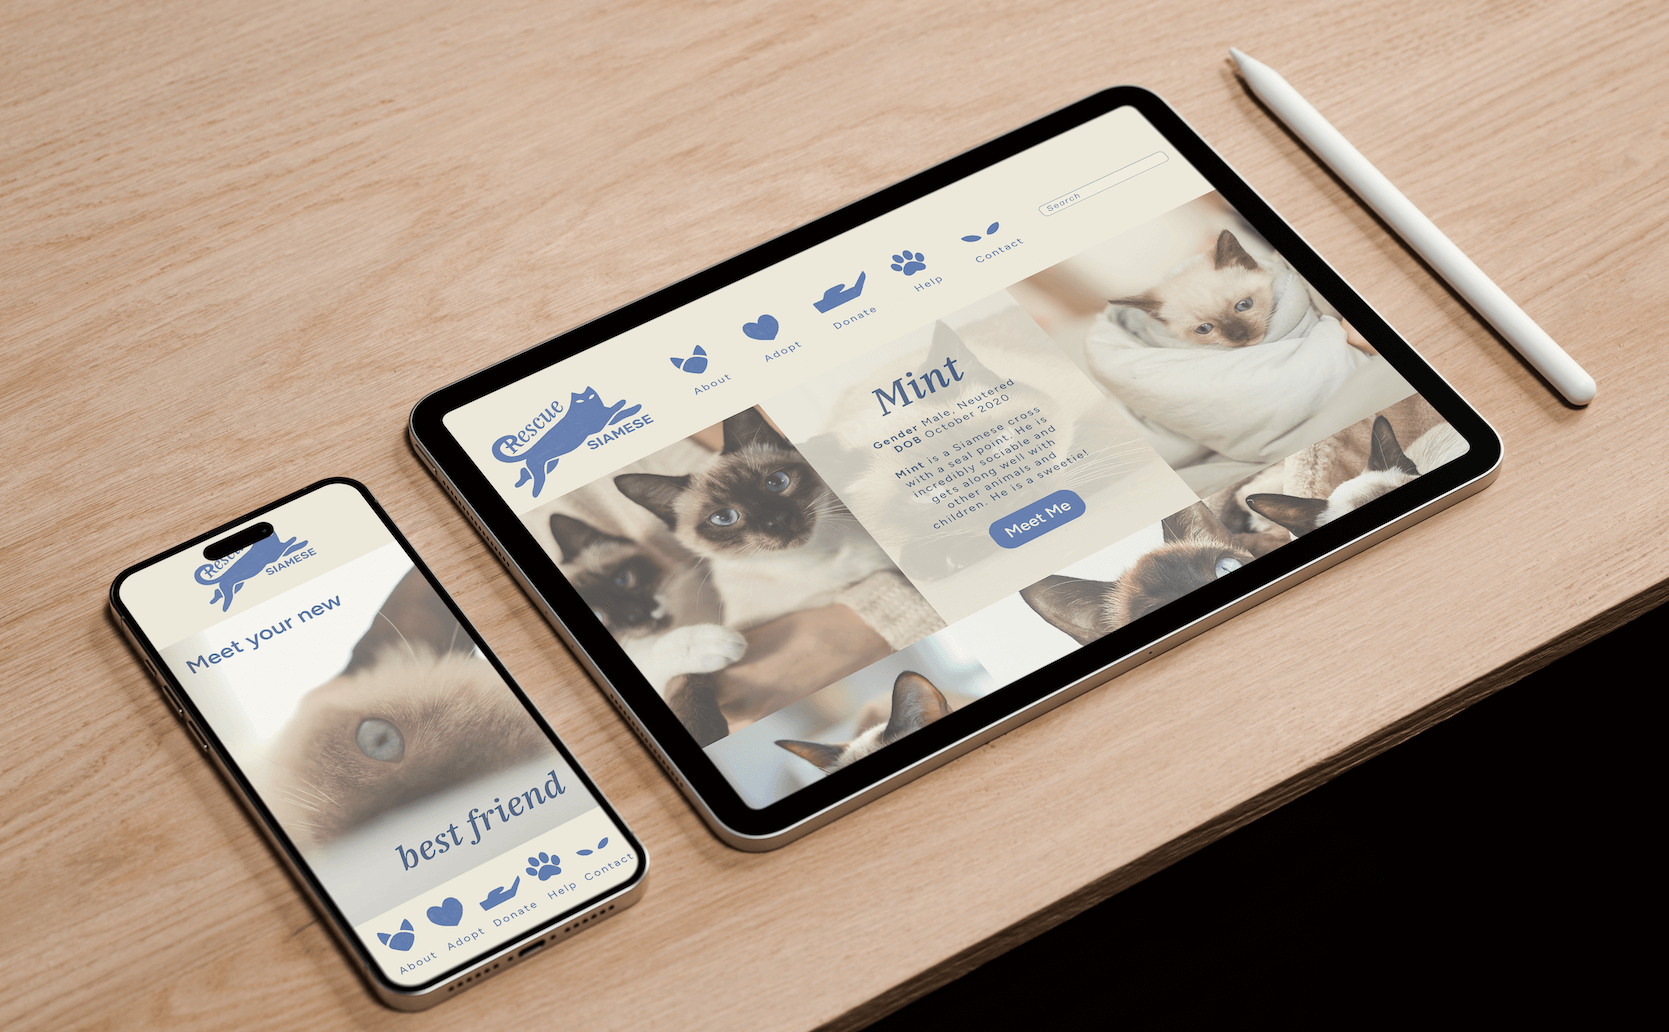 Image of an ipad and iphone featuring Rescue Siamese screens